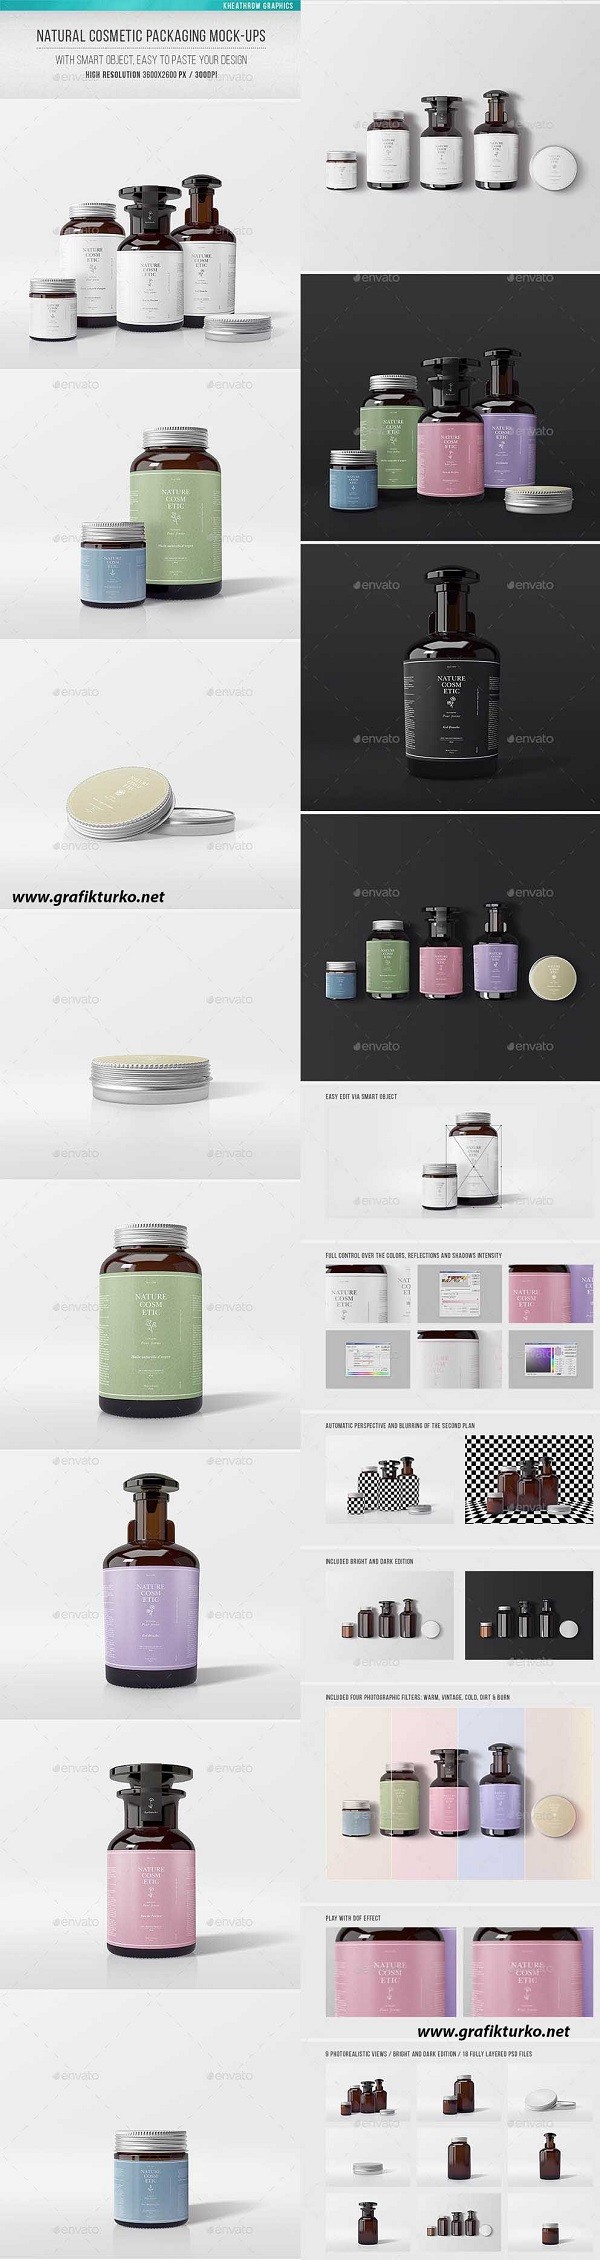 Graphicriver Natural Cosmetic Packaging Mock-Ups 16639138 - PSD